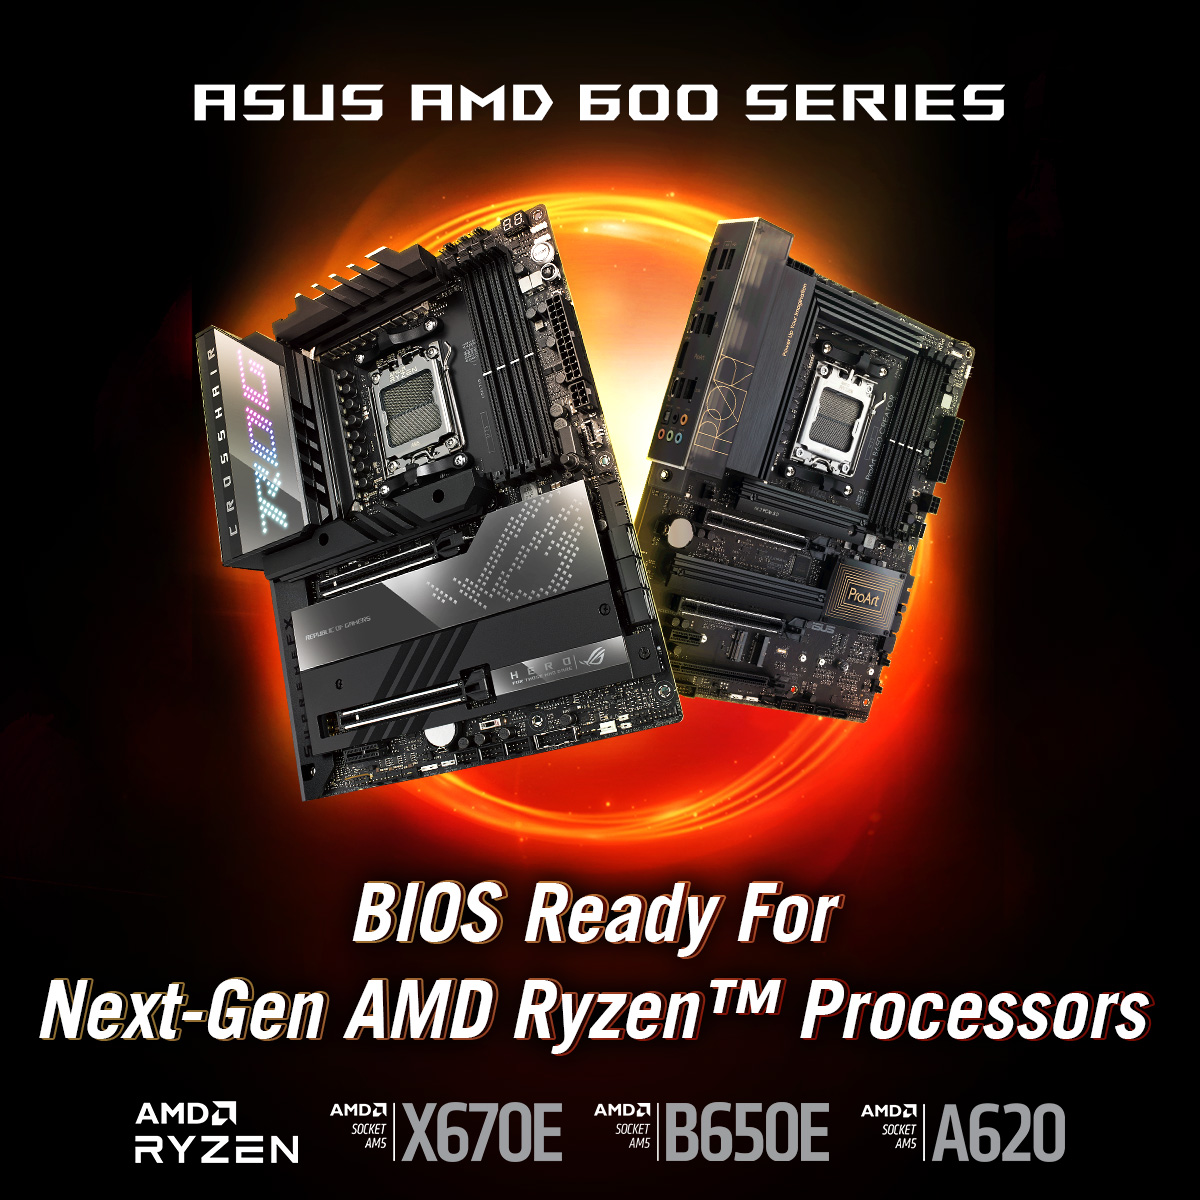 🎉Hold onto your seats! Get ready to supercharge your ASUS #AMD600series motherboards with the latest BIOS updates, offering full support for next-gen AMD Ryzen™ processors. 💥Ready to power up? Learn more: 👉🏻asus.click/600series-bios 👉🏻asus.click/600series-bios…